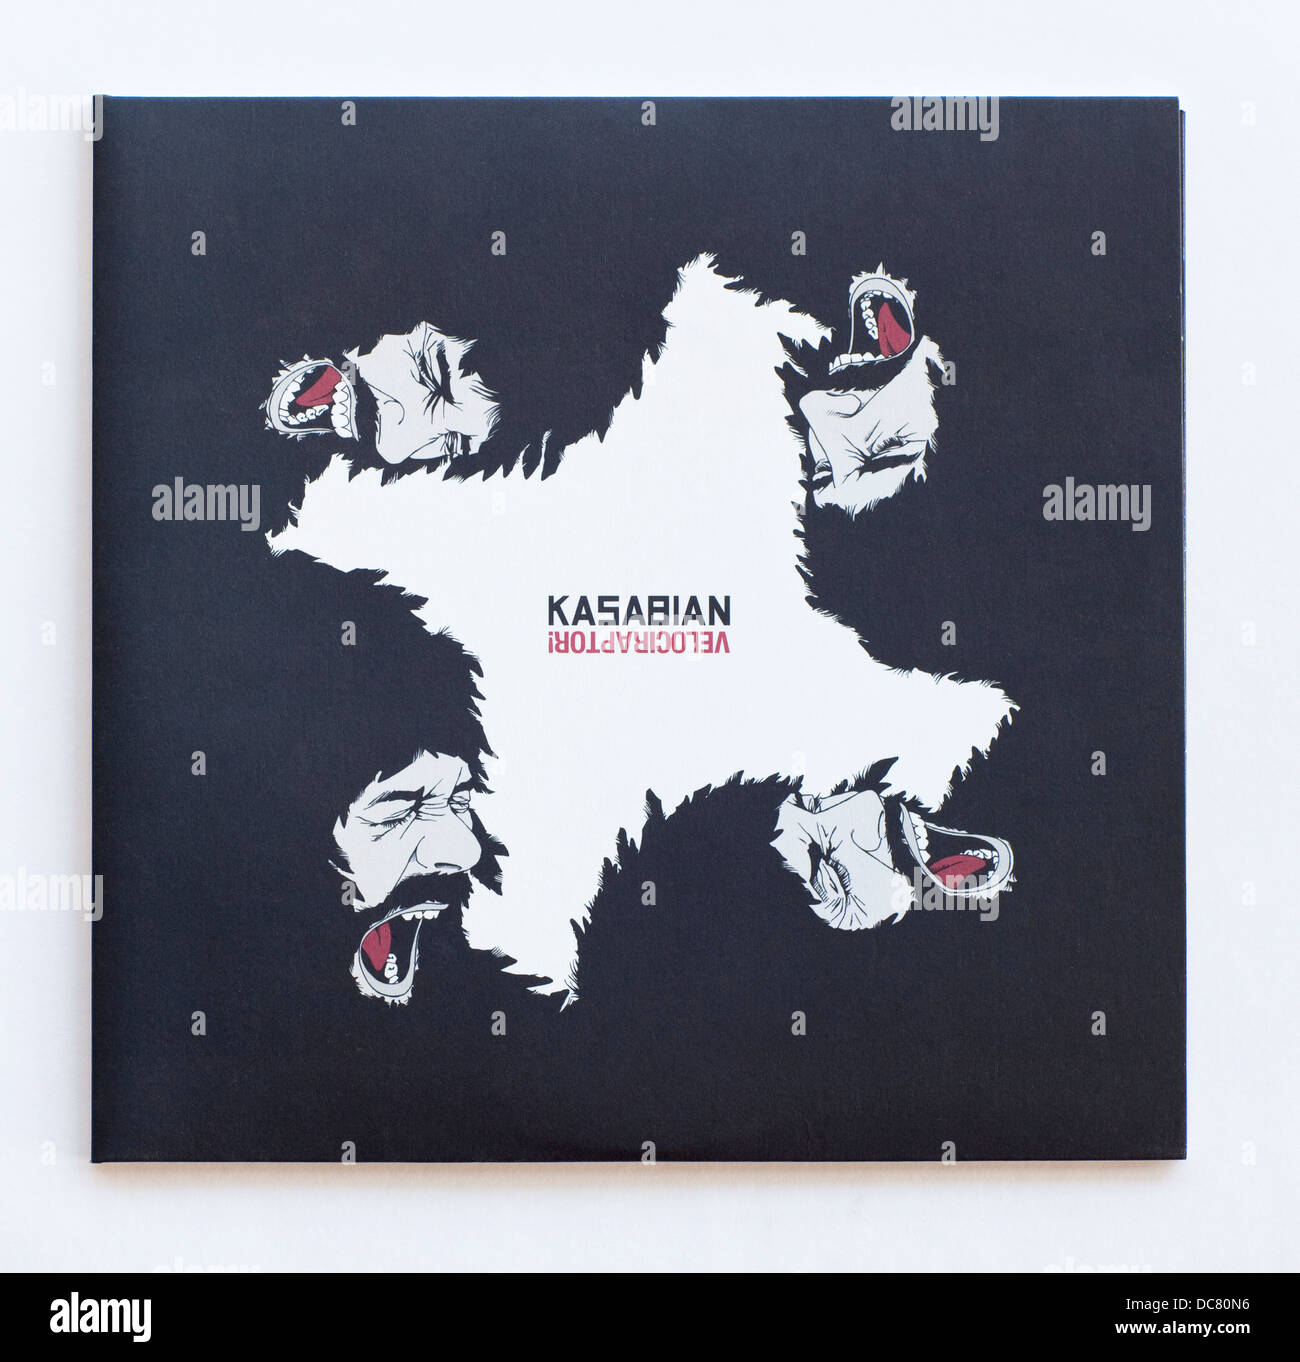 Kasabian - Velociraptor!, Limited edition 10' vinyl 2011 album on RCA/Columbia Records - Editorial use only Stock Photo